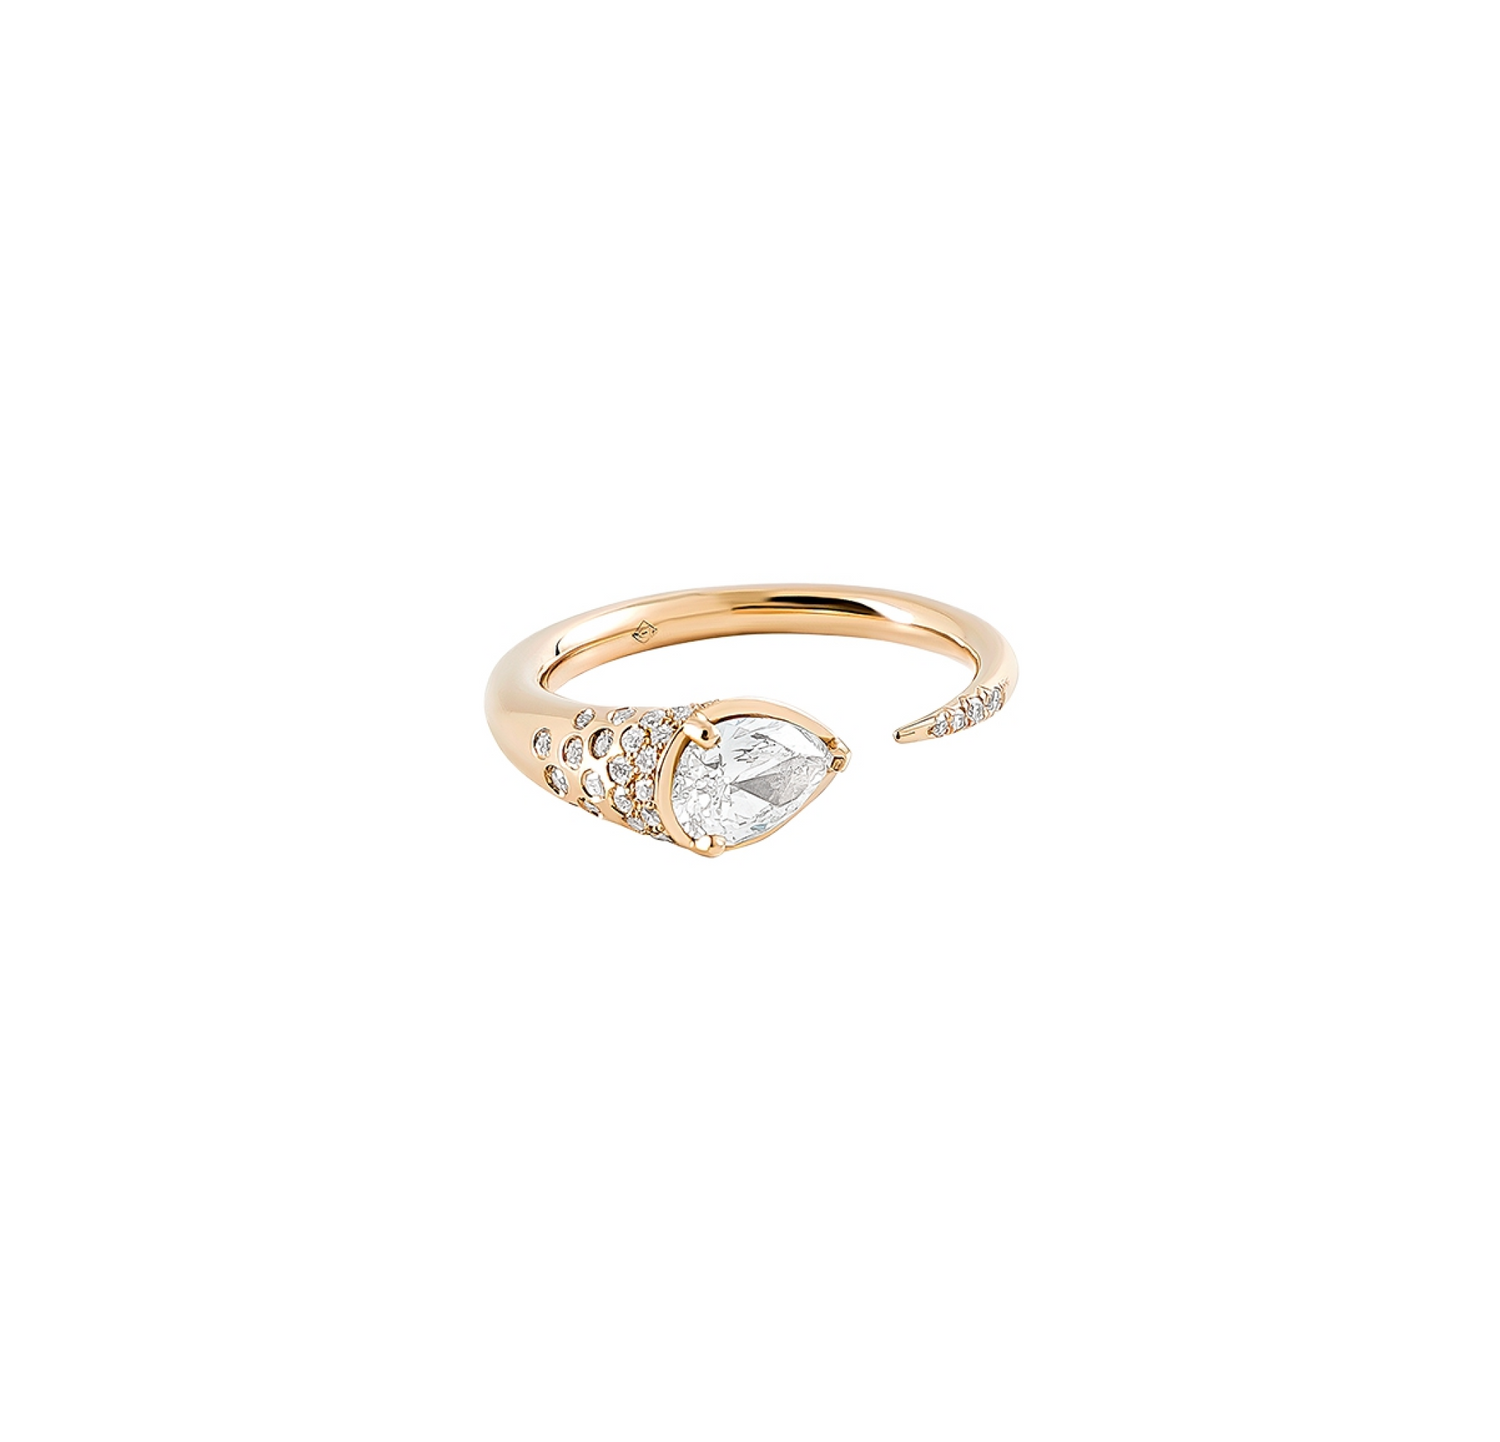 Sornette ring with dots, diamond, and yellow gold